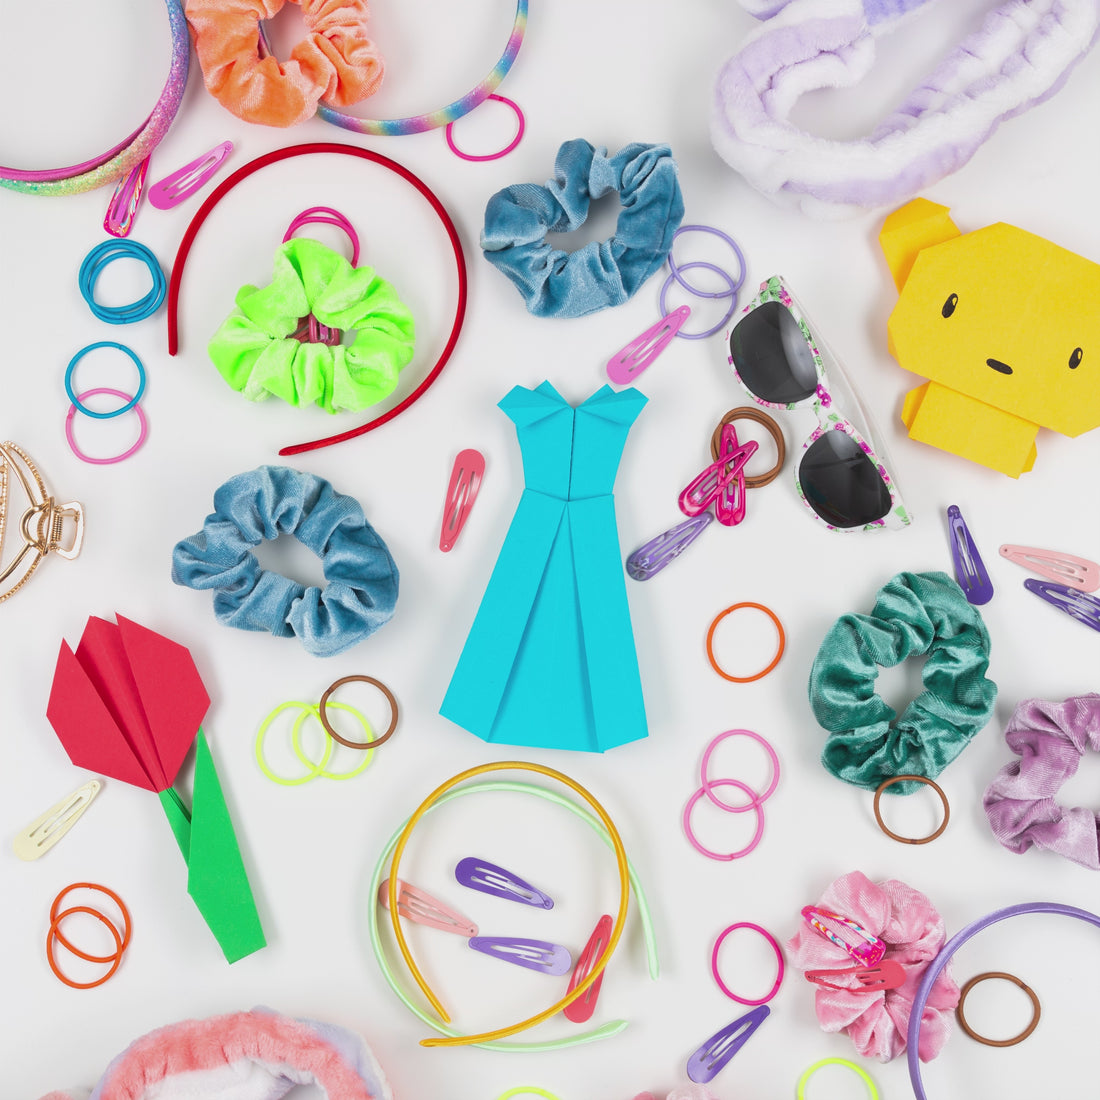 This stop motion image shows lots of hair accessories against a white background. The accessories wiggle out of the frame as the mint green hair accessory storage box enters. A finger presses on it and it turns to pink. It then opens and it is empty. With the wave of a hand it is filled with beautiful hair accessories. The box then closes and wiggles out of the frame.